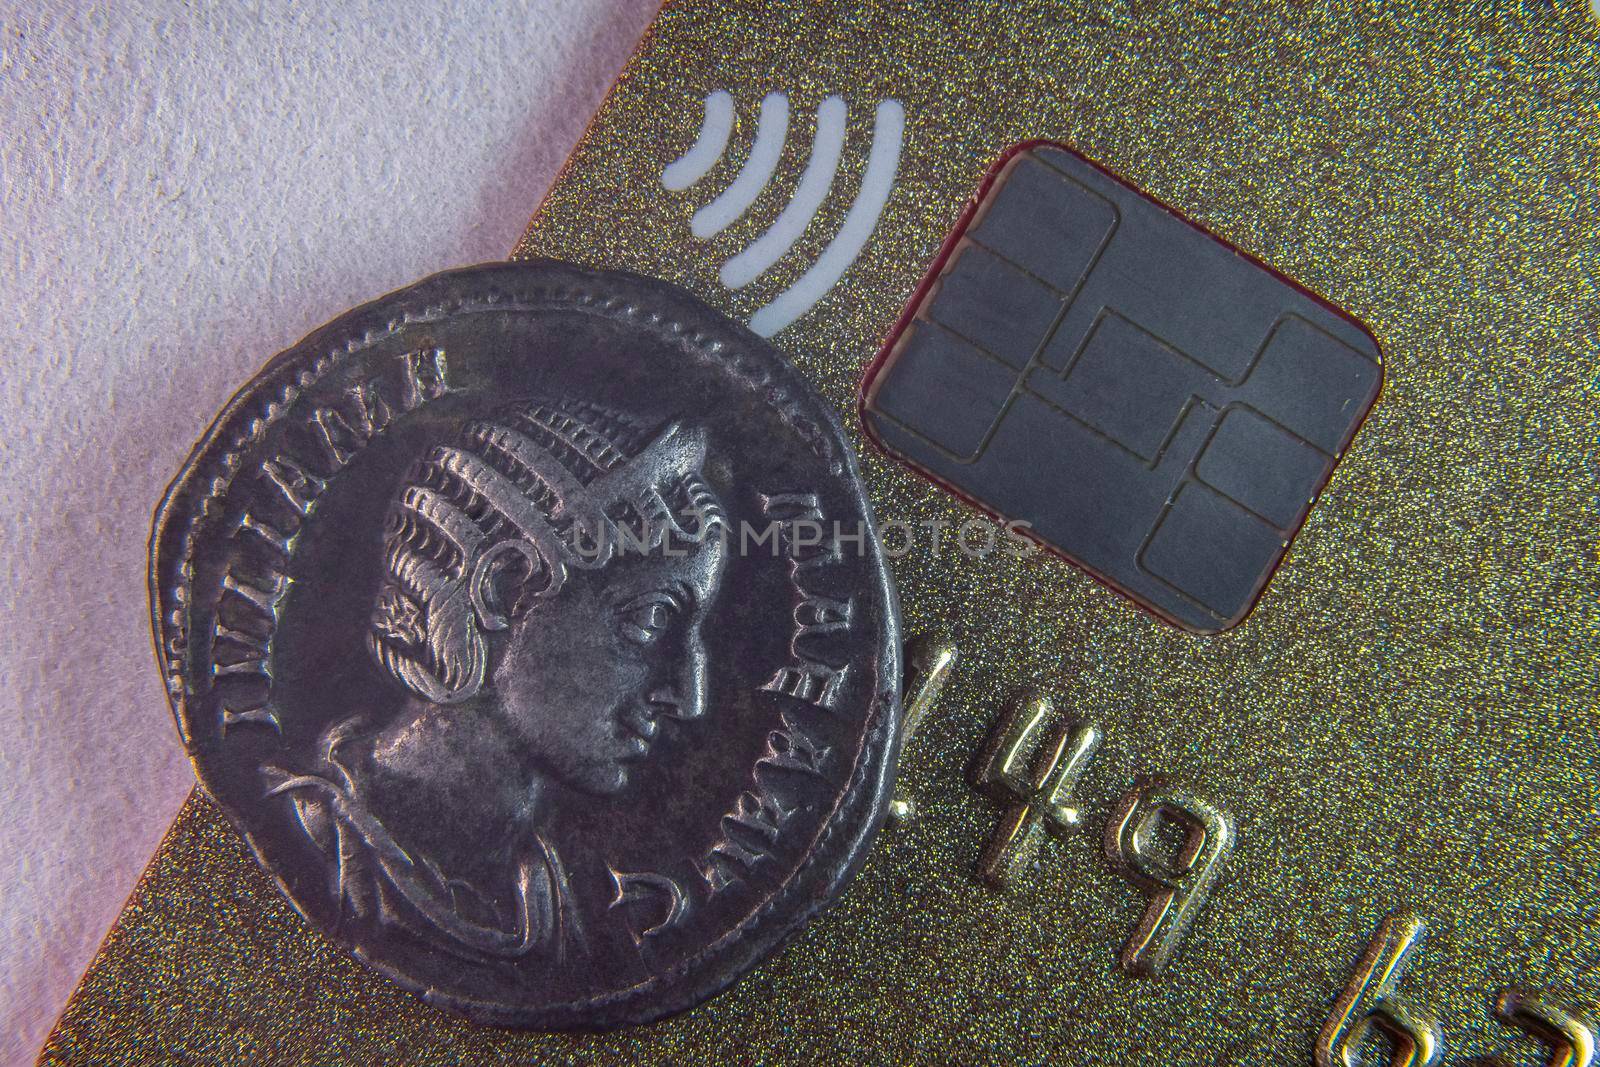 Old coin near the NFC chip by zokov